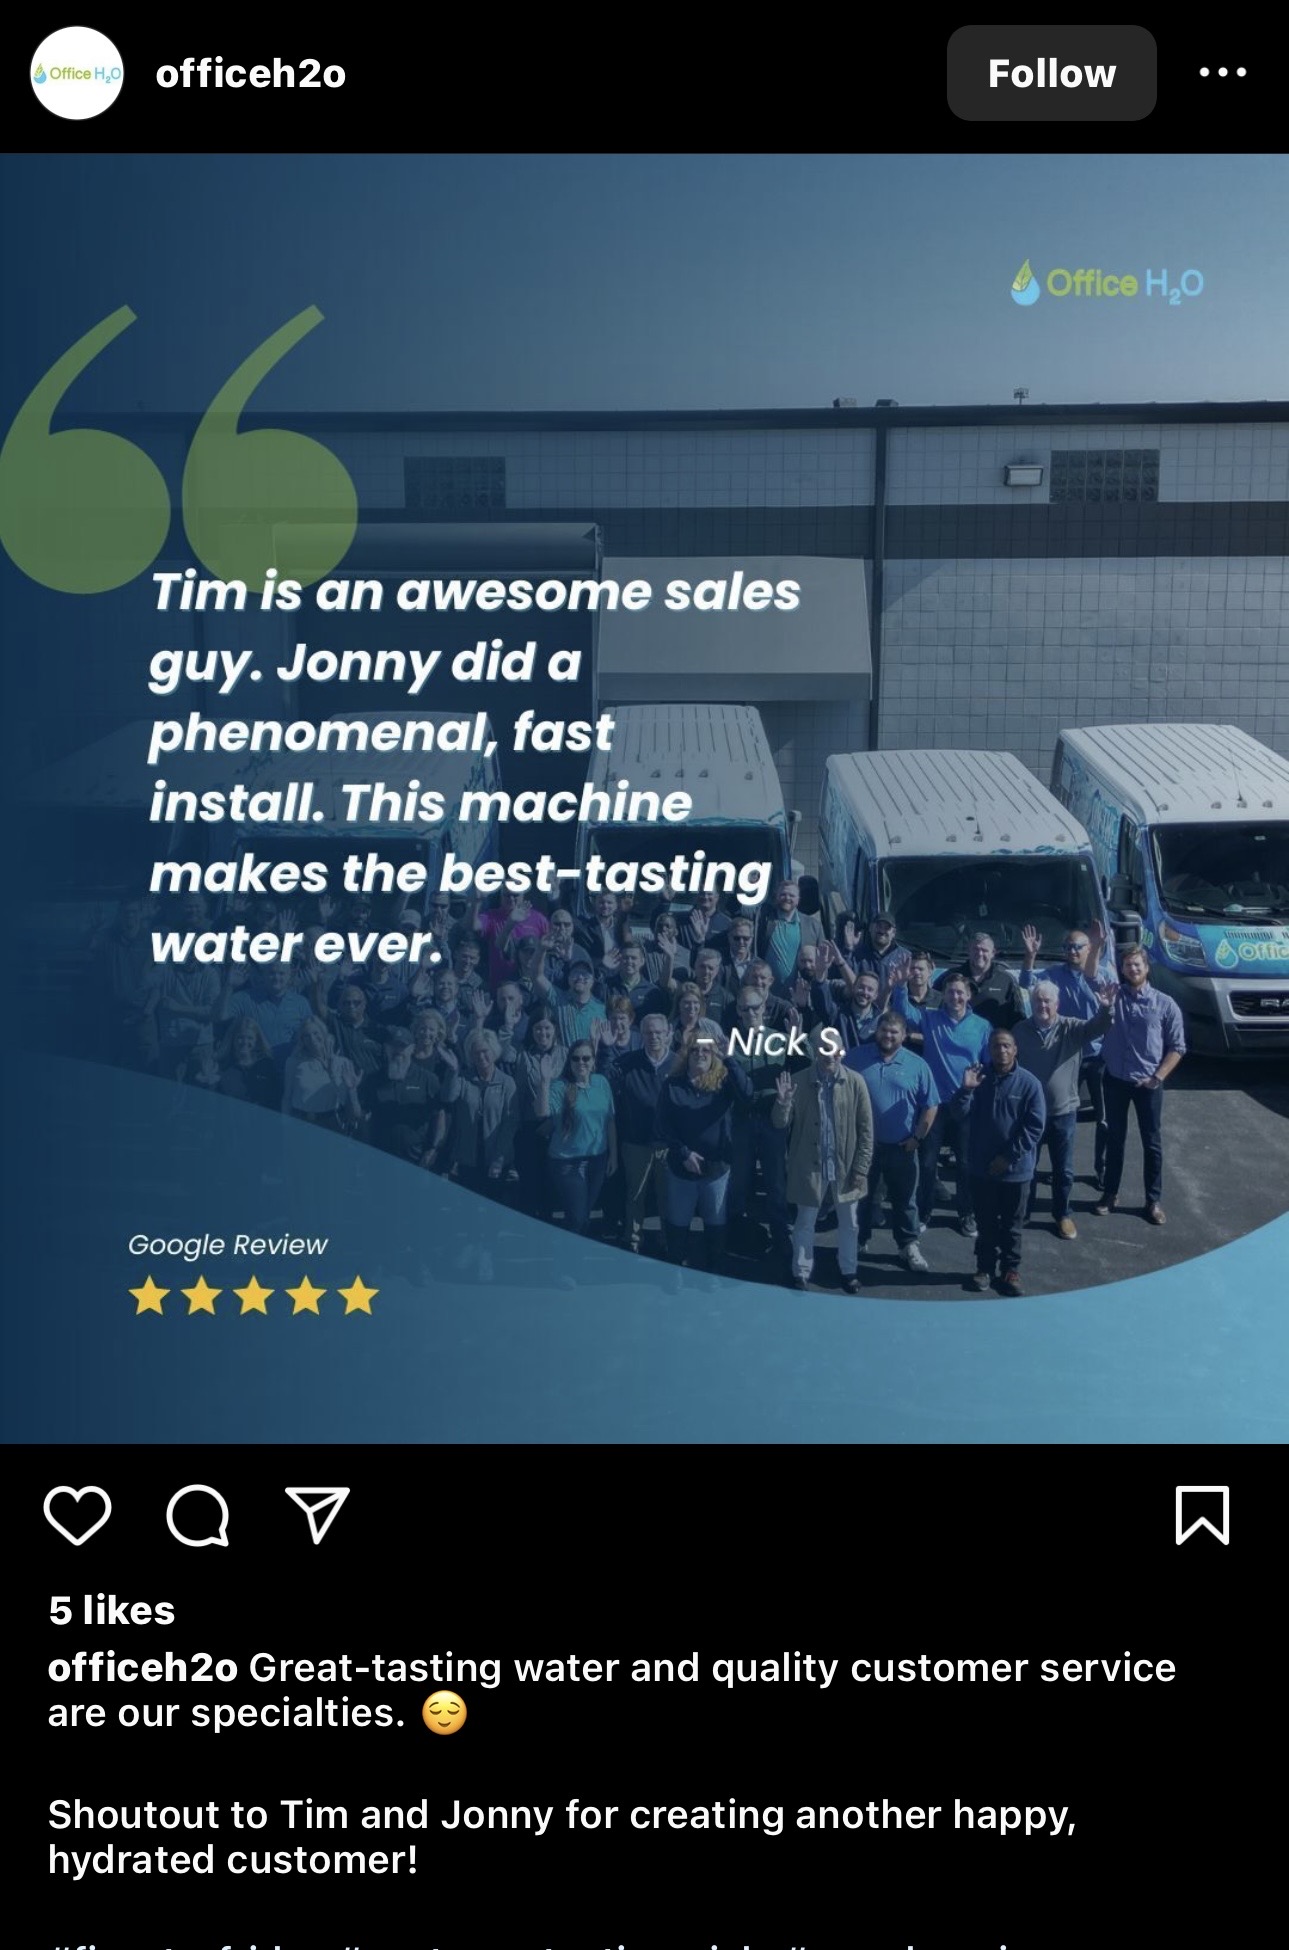 A social media image showing a customer testimonial of a brand